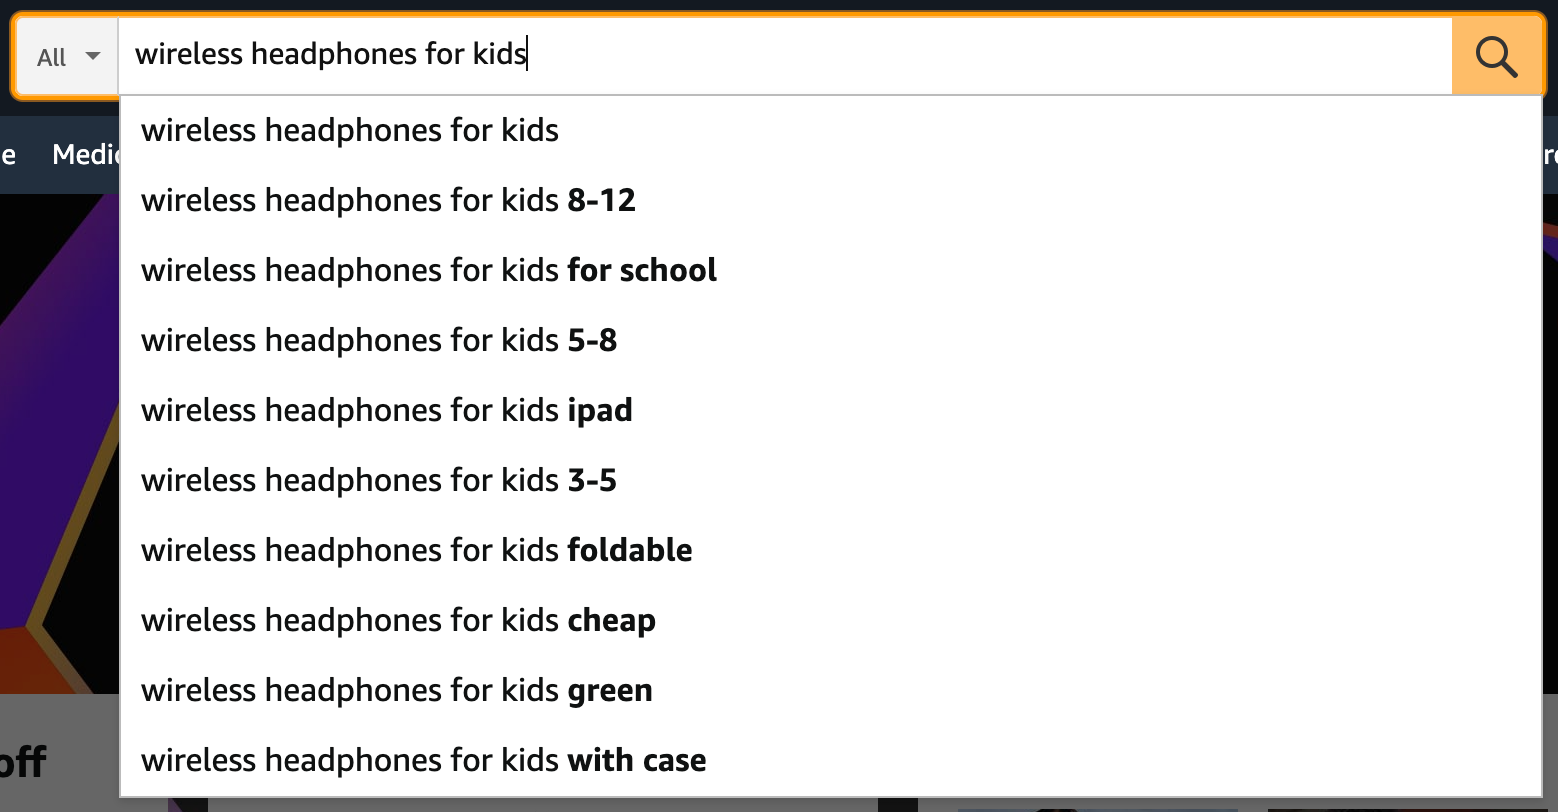 Amazon’s search feature suggestions when typing "wireless headphones for kids"